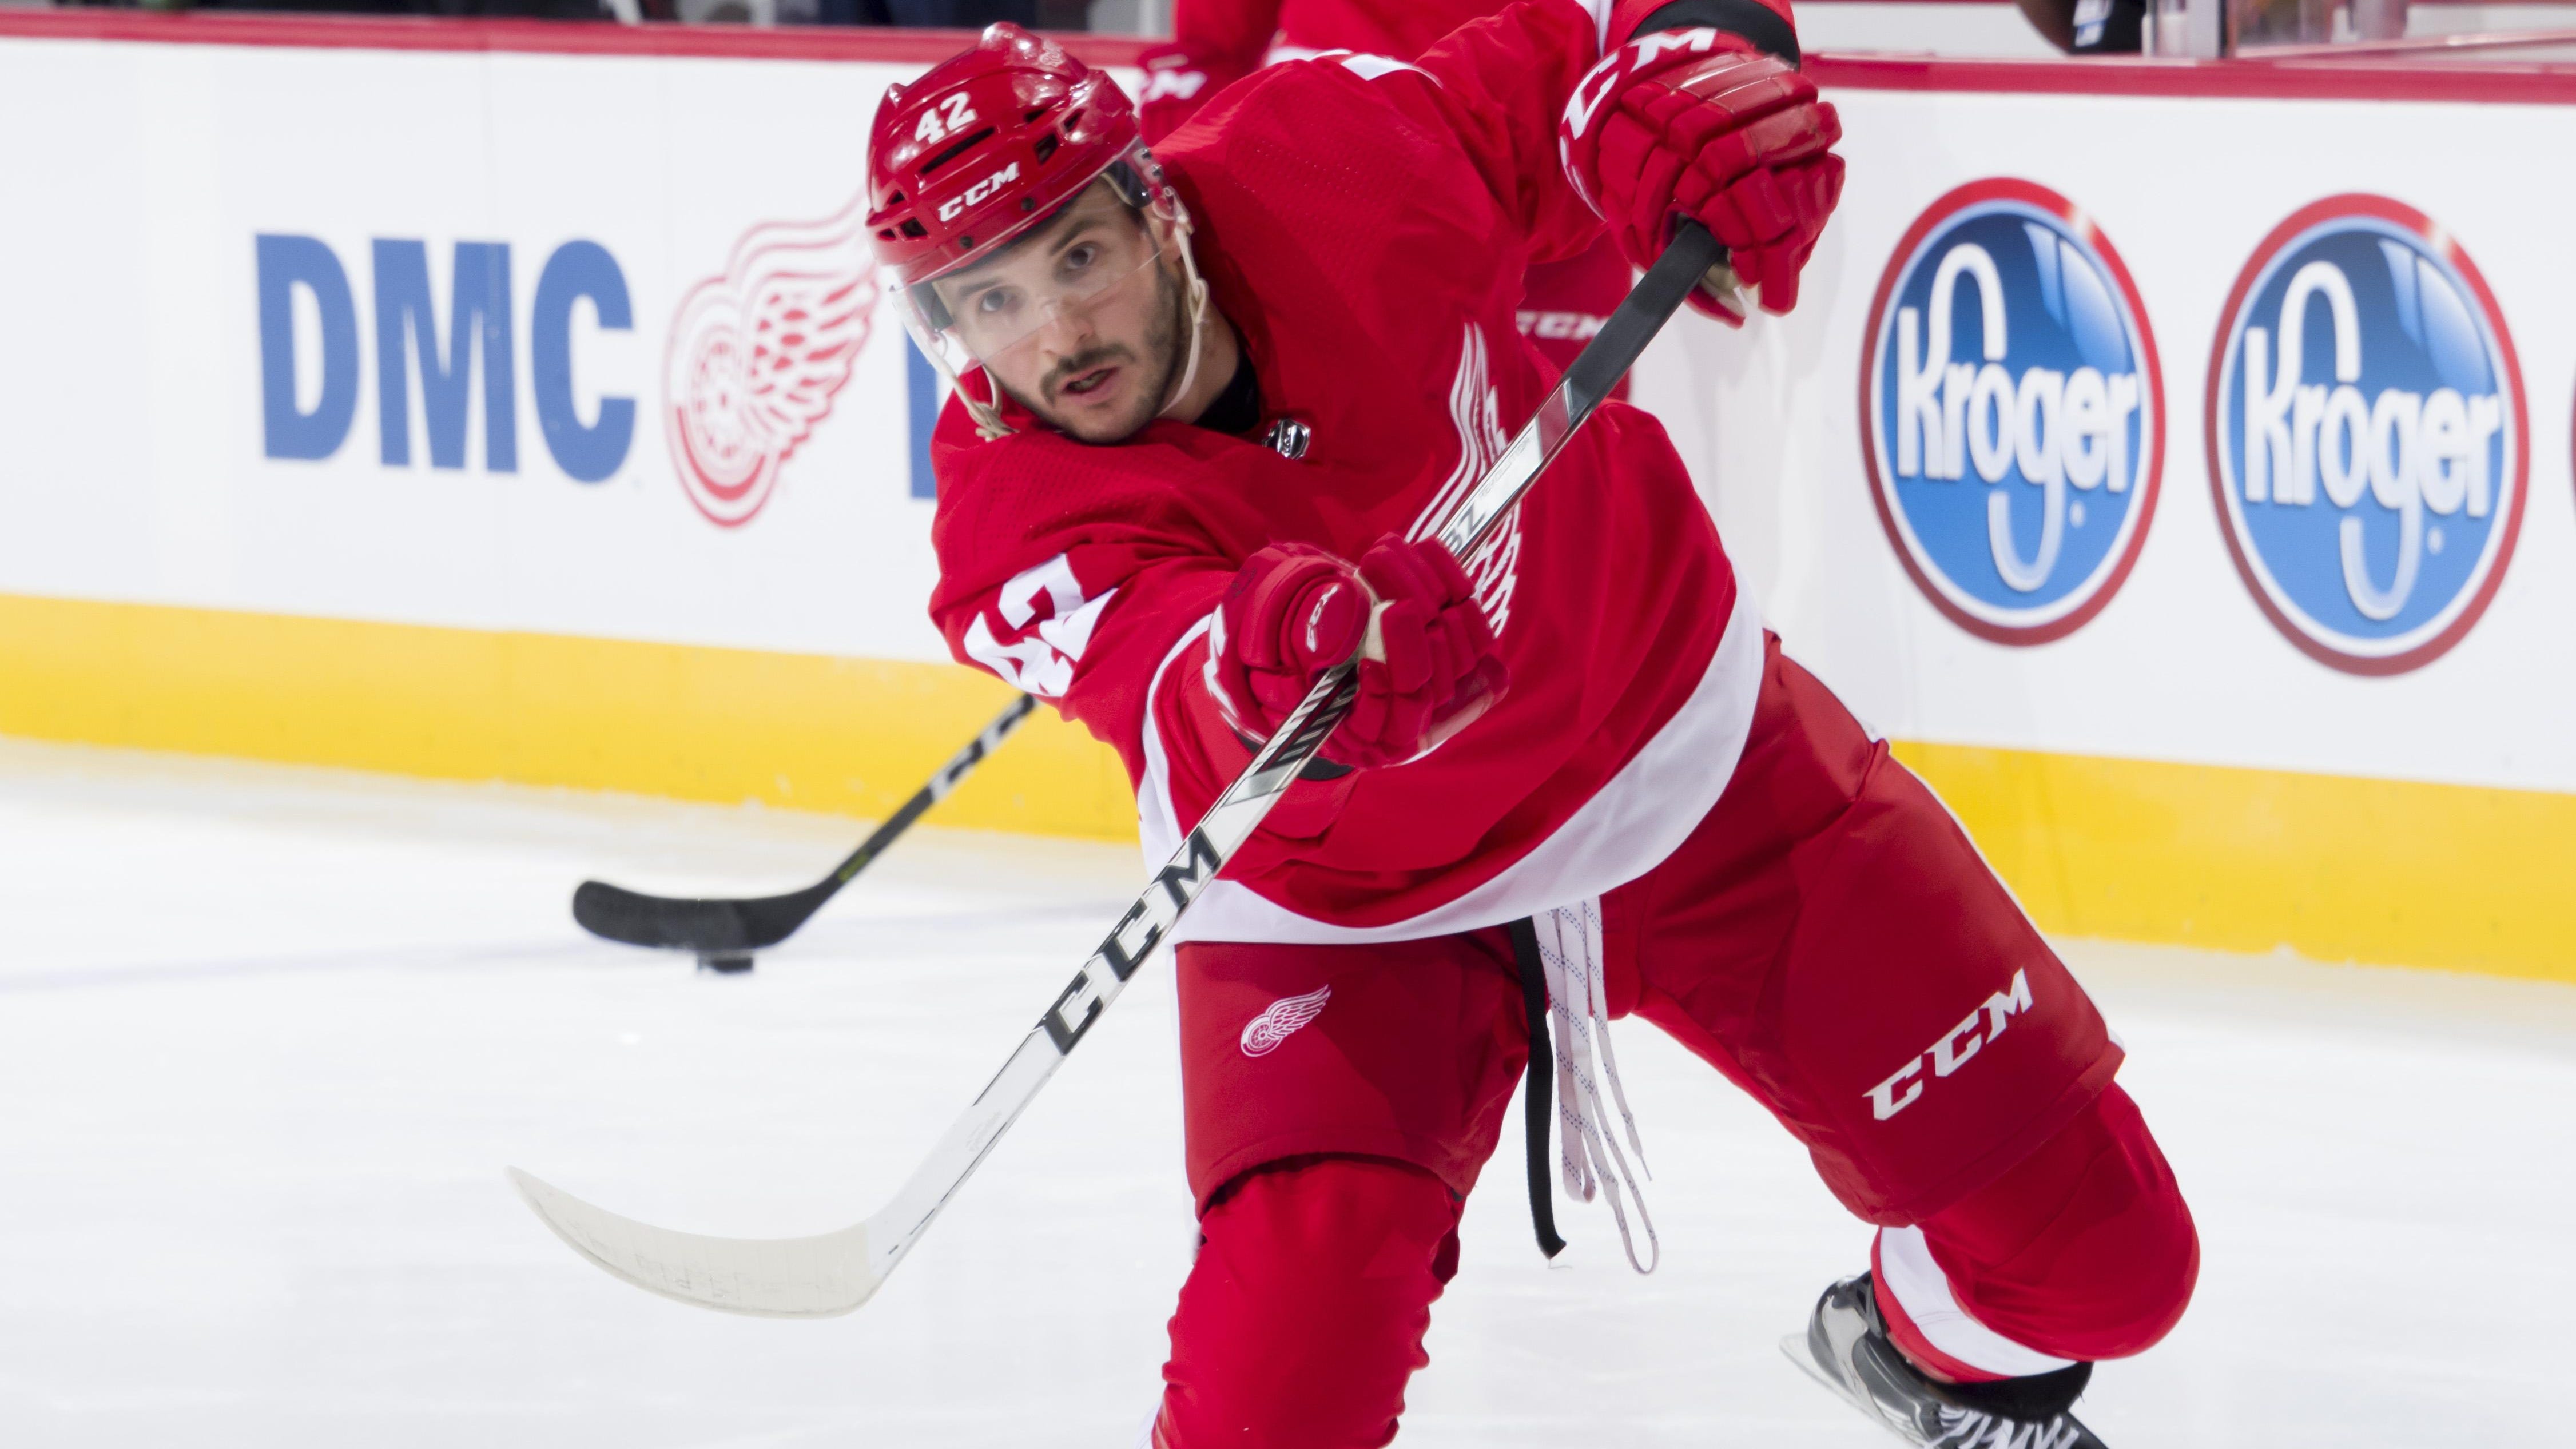 Martin Frk, 24, signed a one-year deal worth $1.05 million in June with the Red Wings.